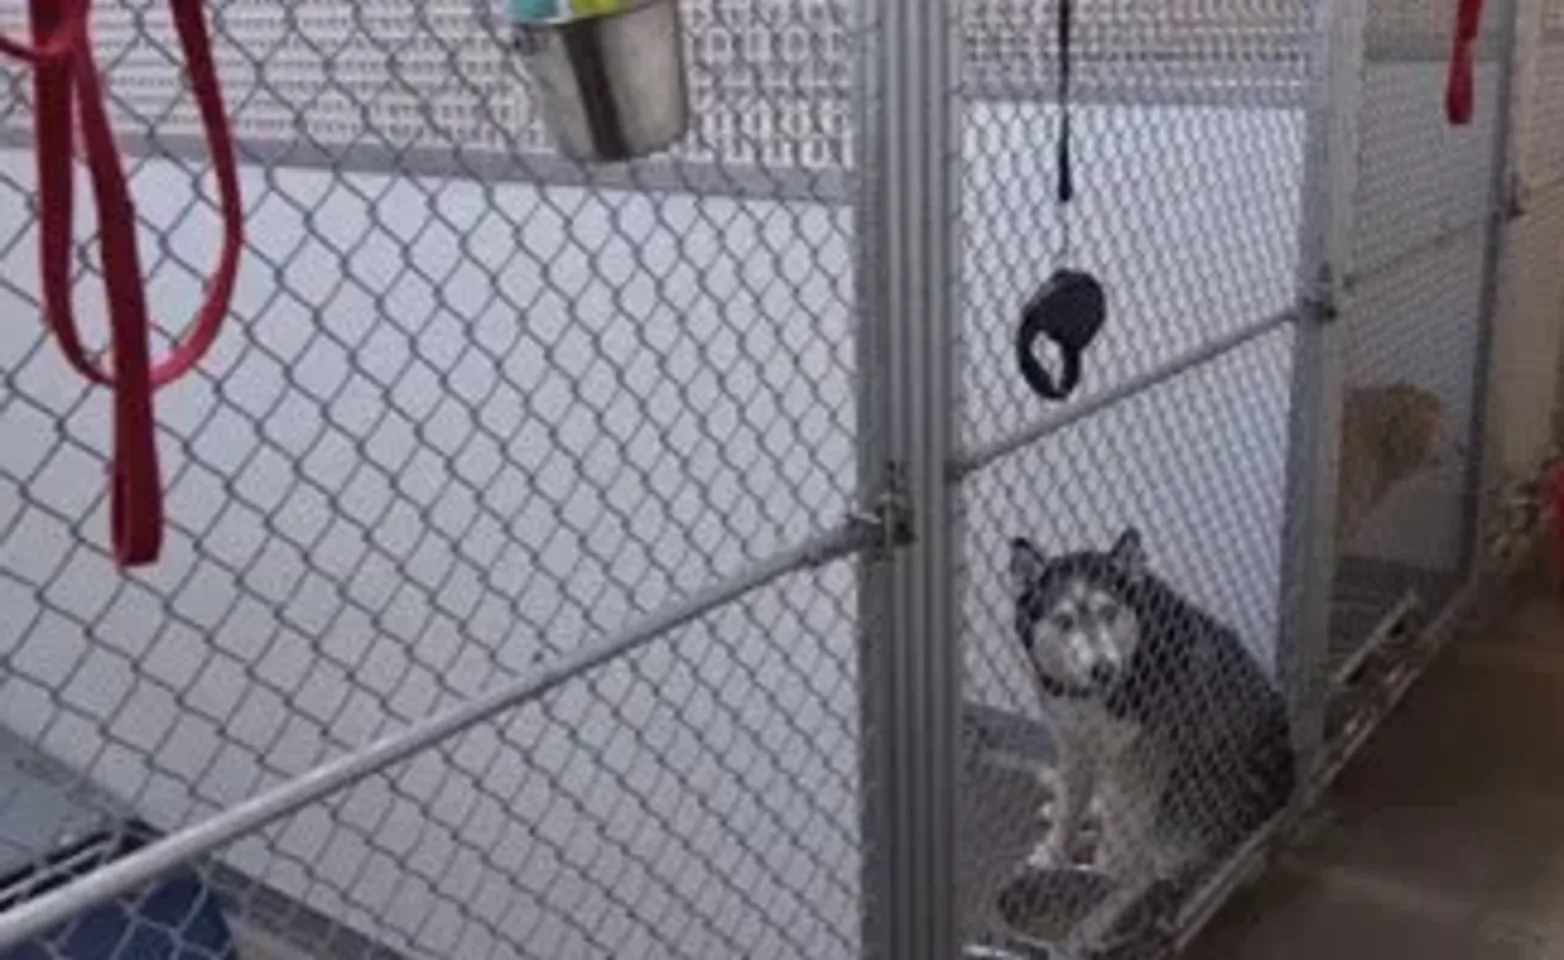 Eastside Pet Clinic's kennel with dog inside